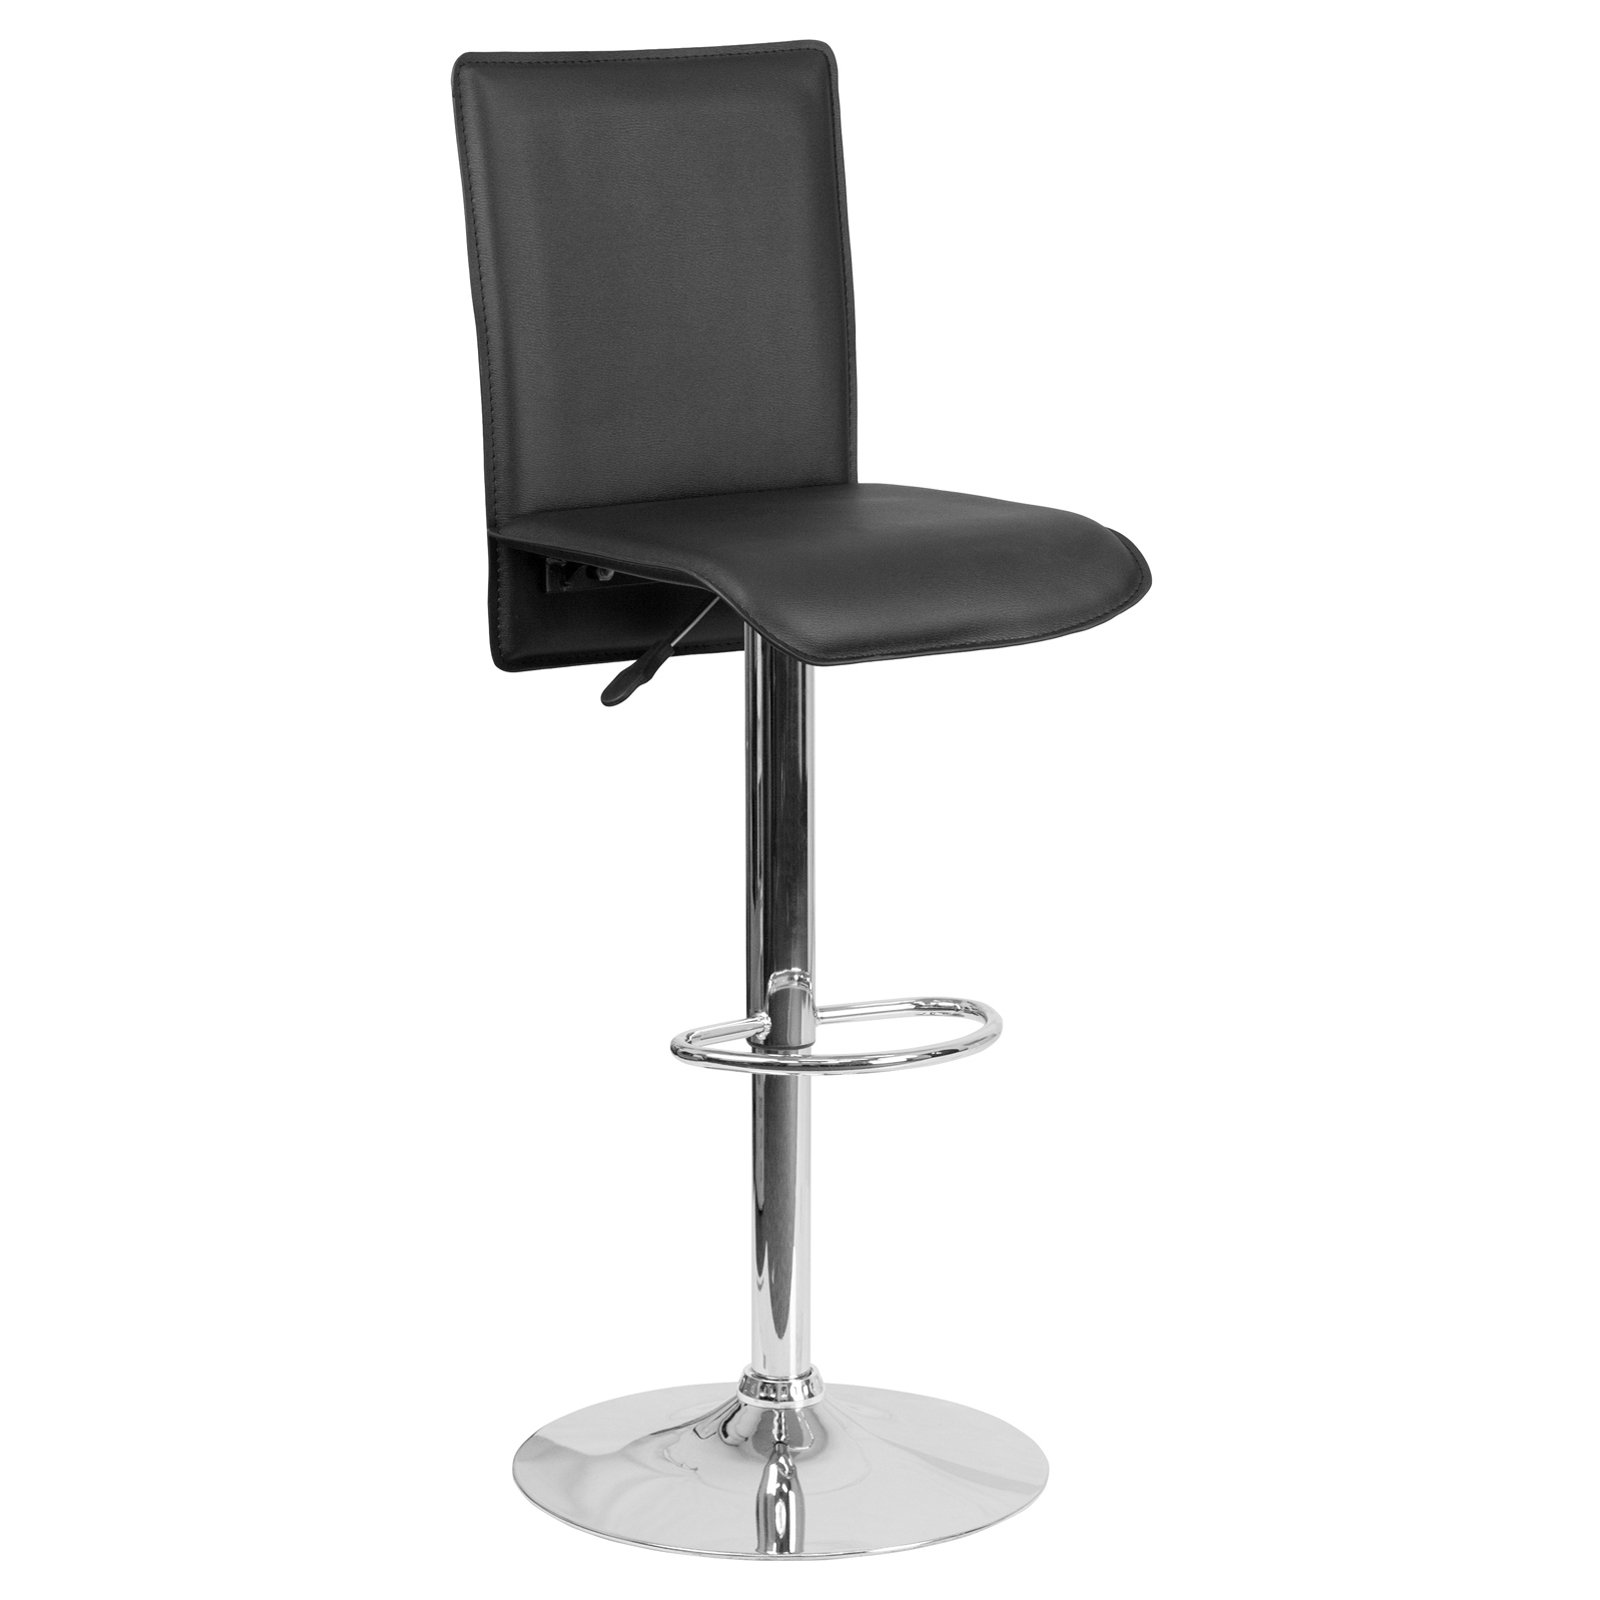 Flash Furniture Contemporary White Vinyl Adjustable Height Barstool with Extended Back and Chrome Base - image 2 of 2